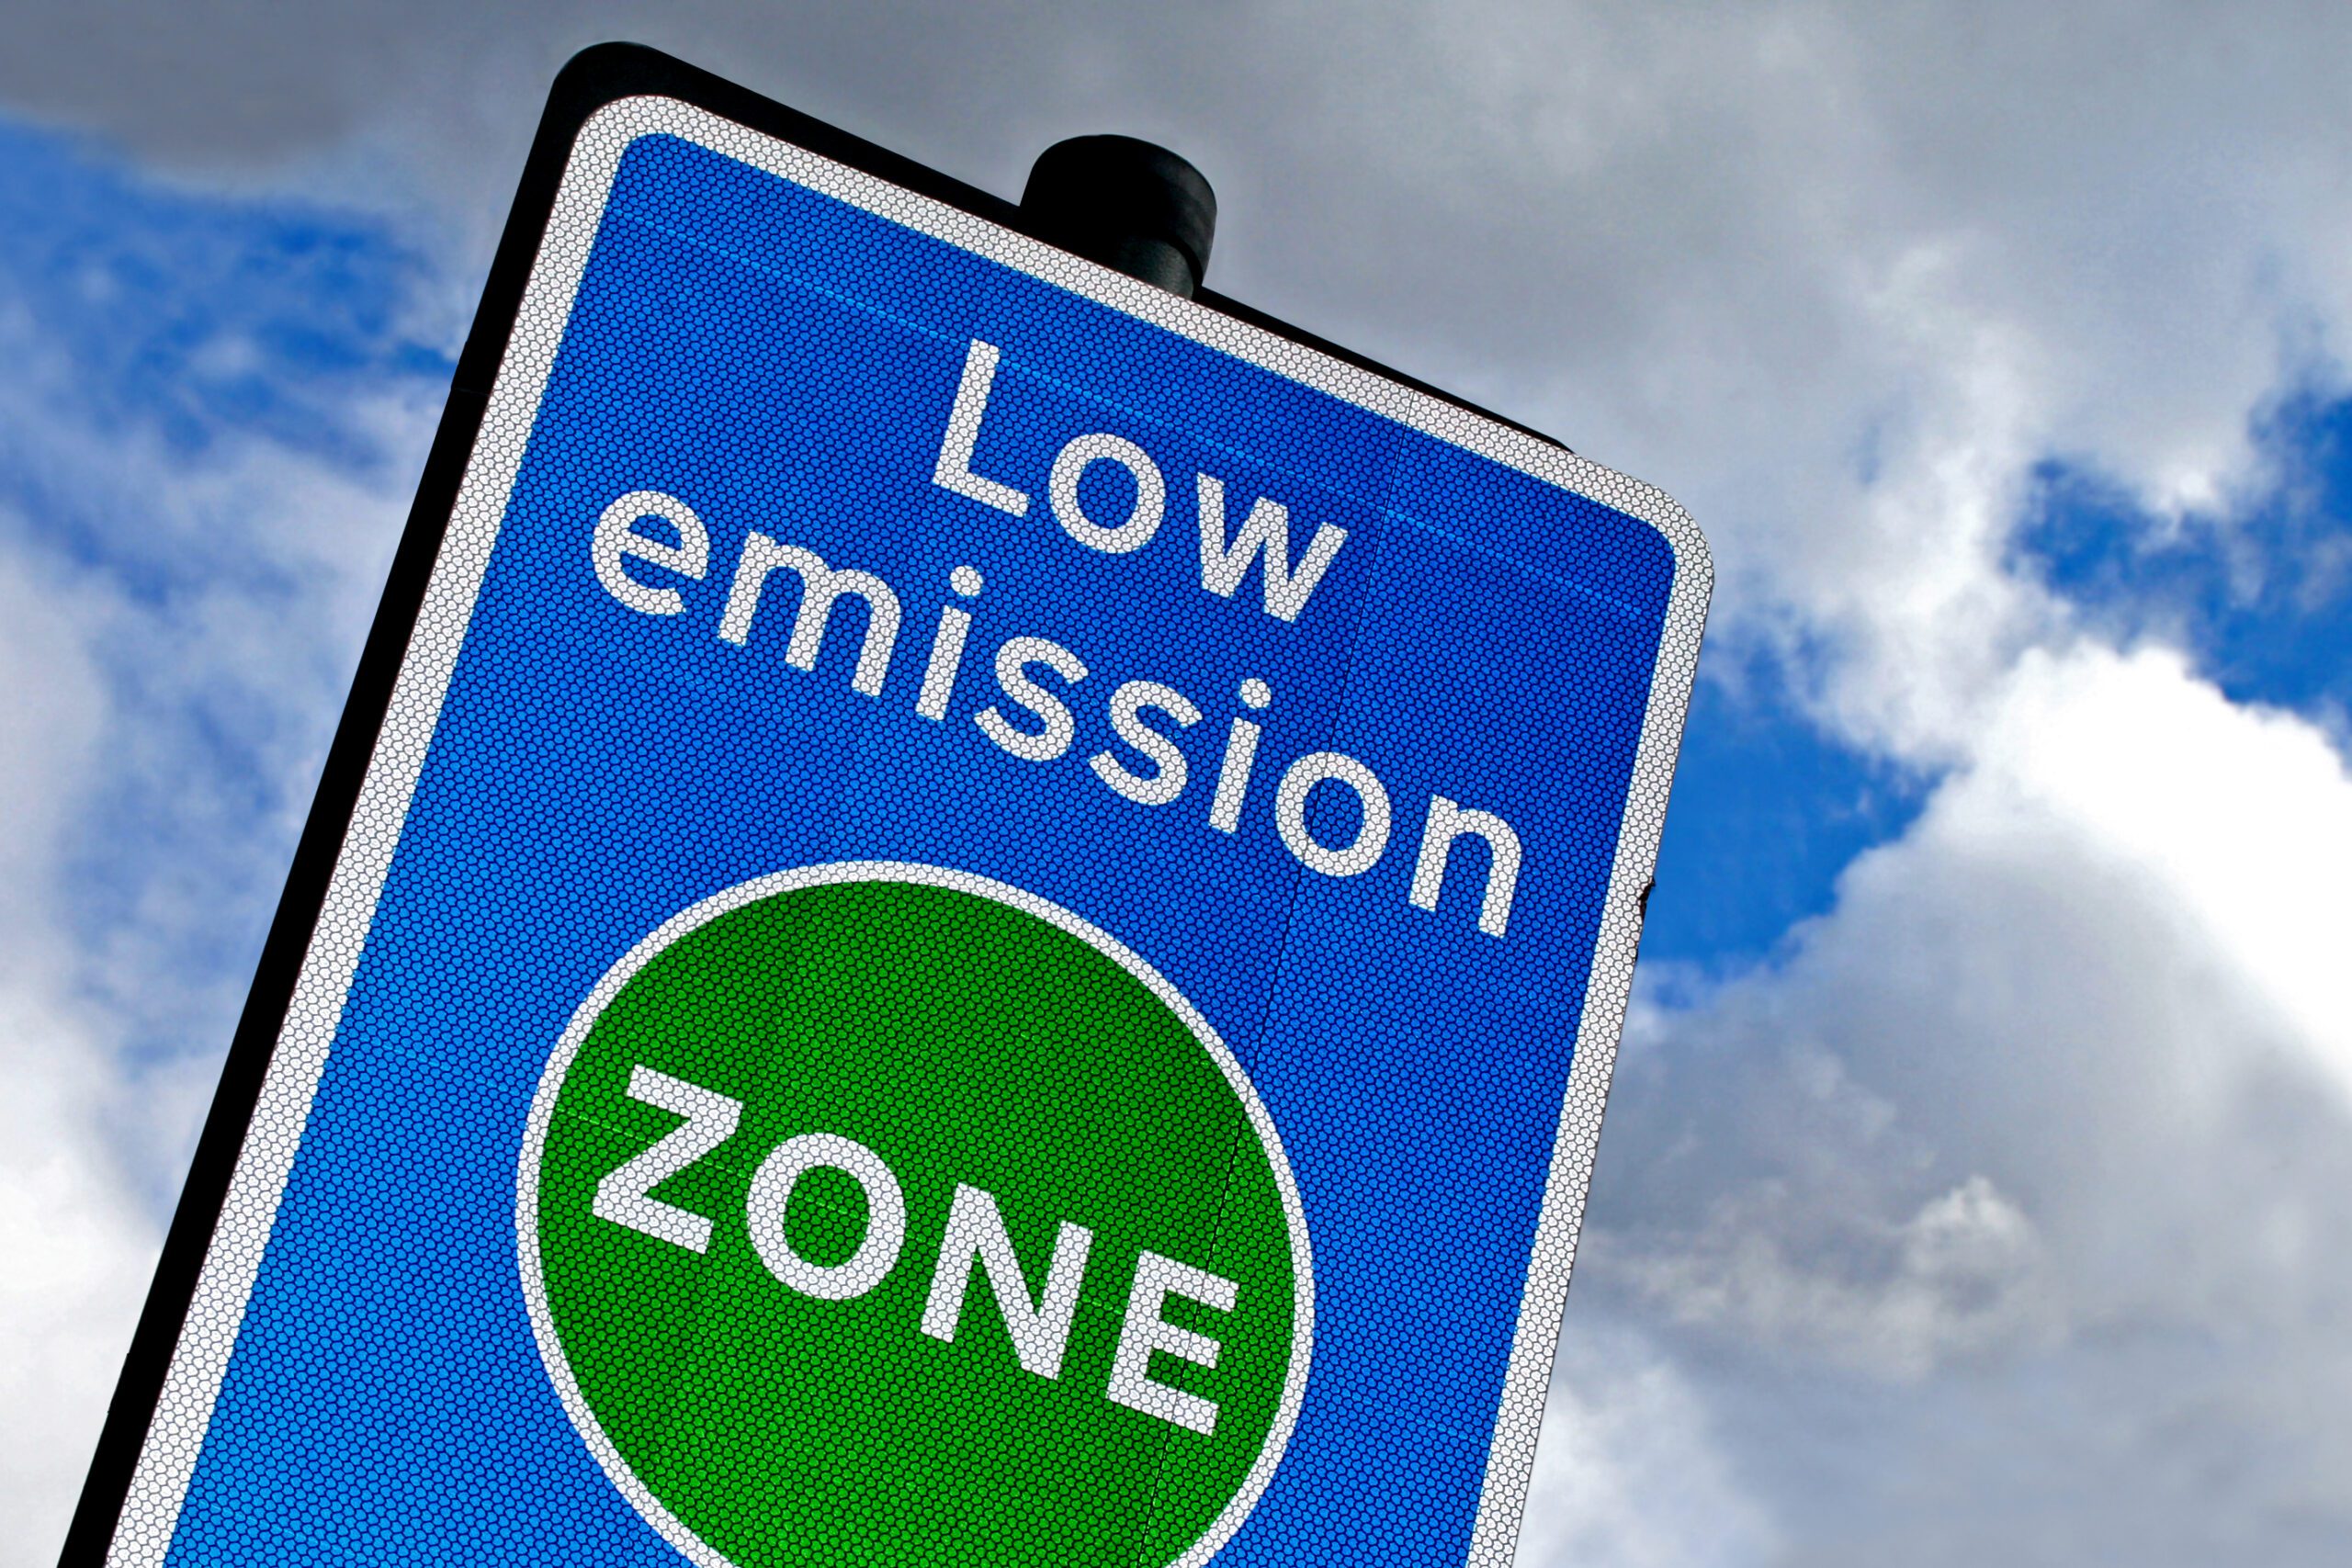 A low emission zone sign with a blue, cloudy sky in the background